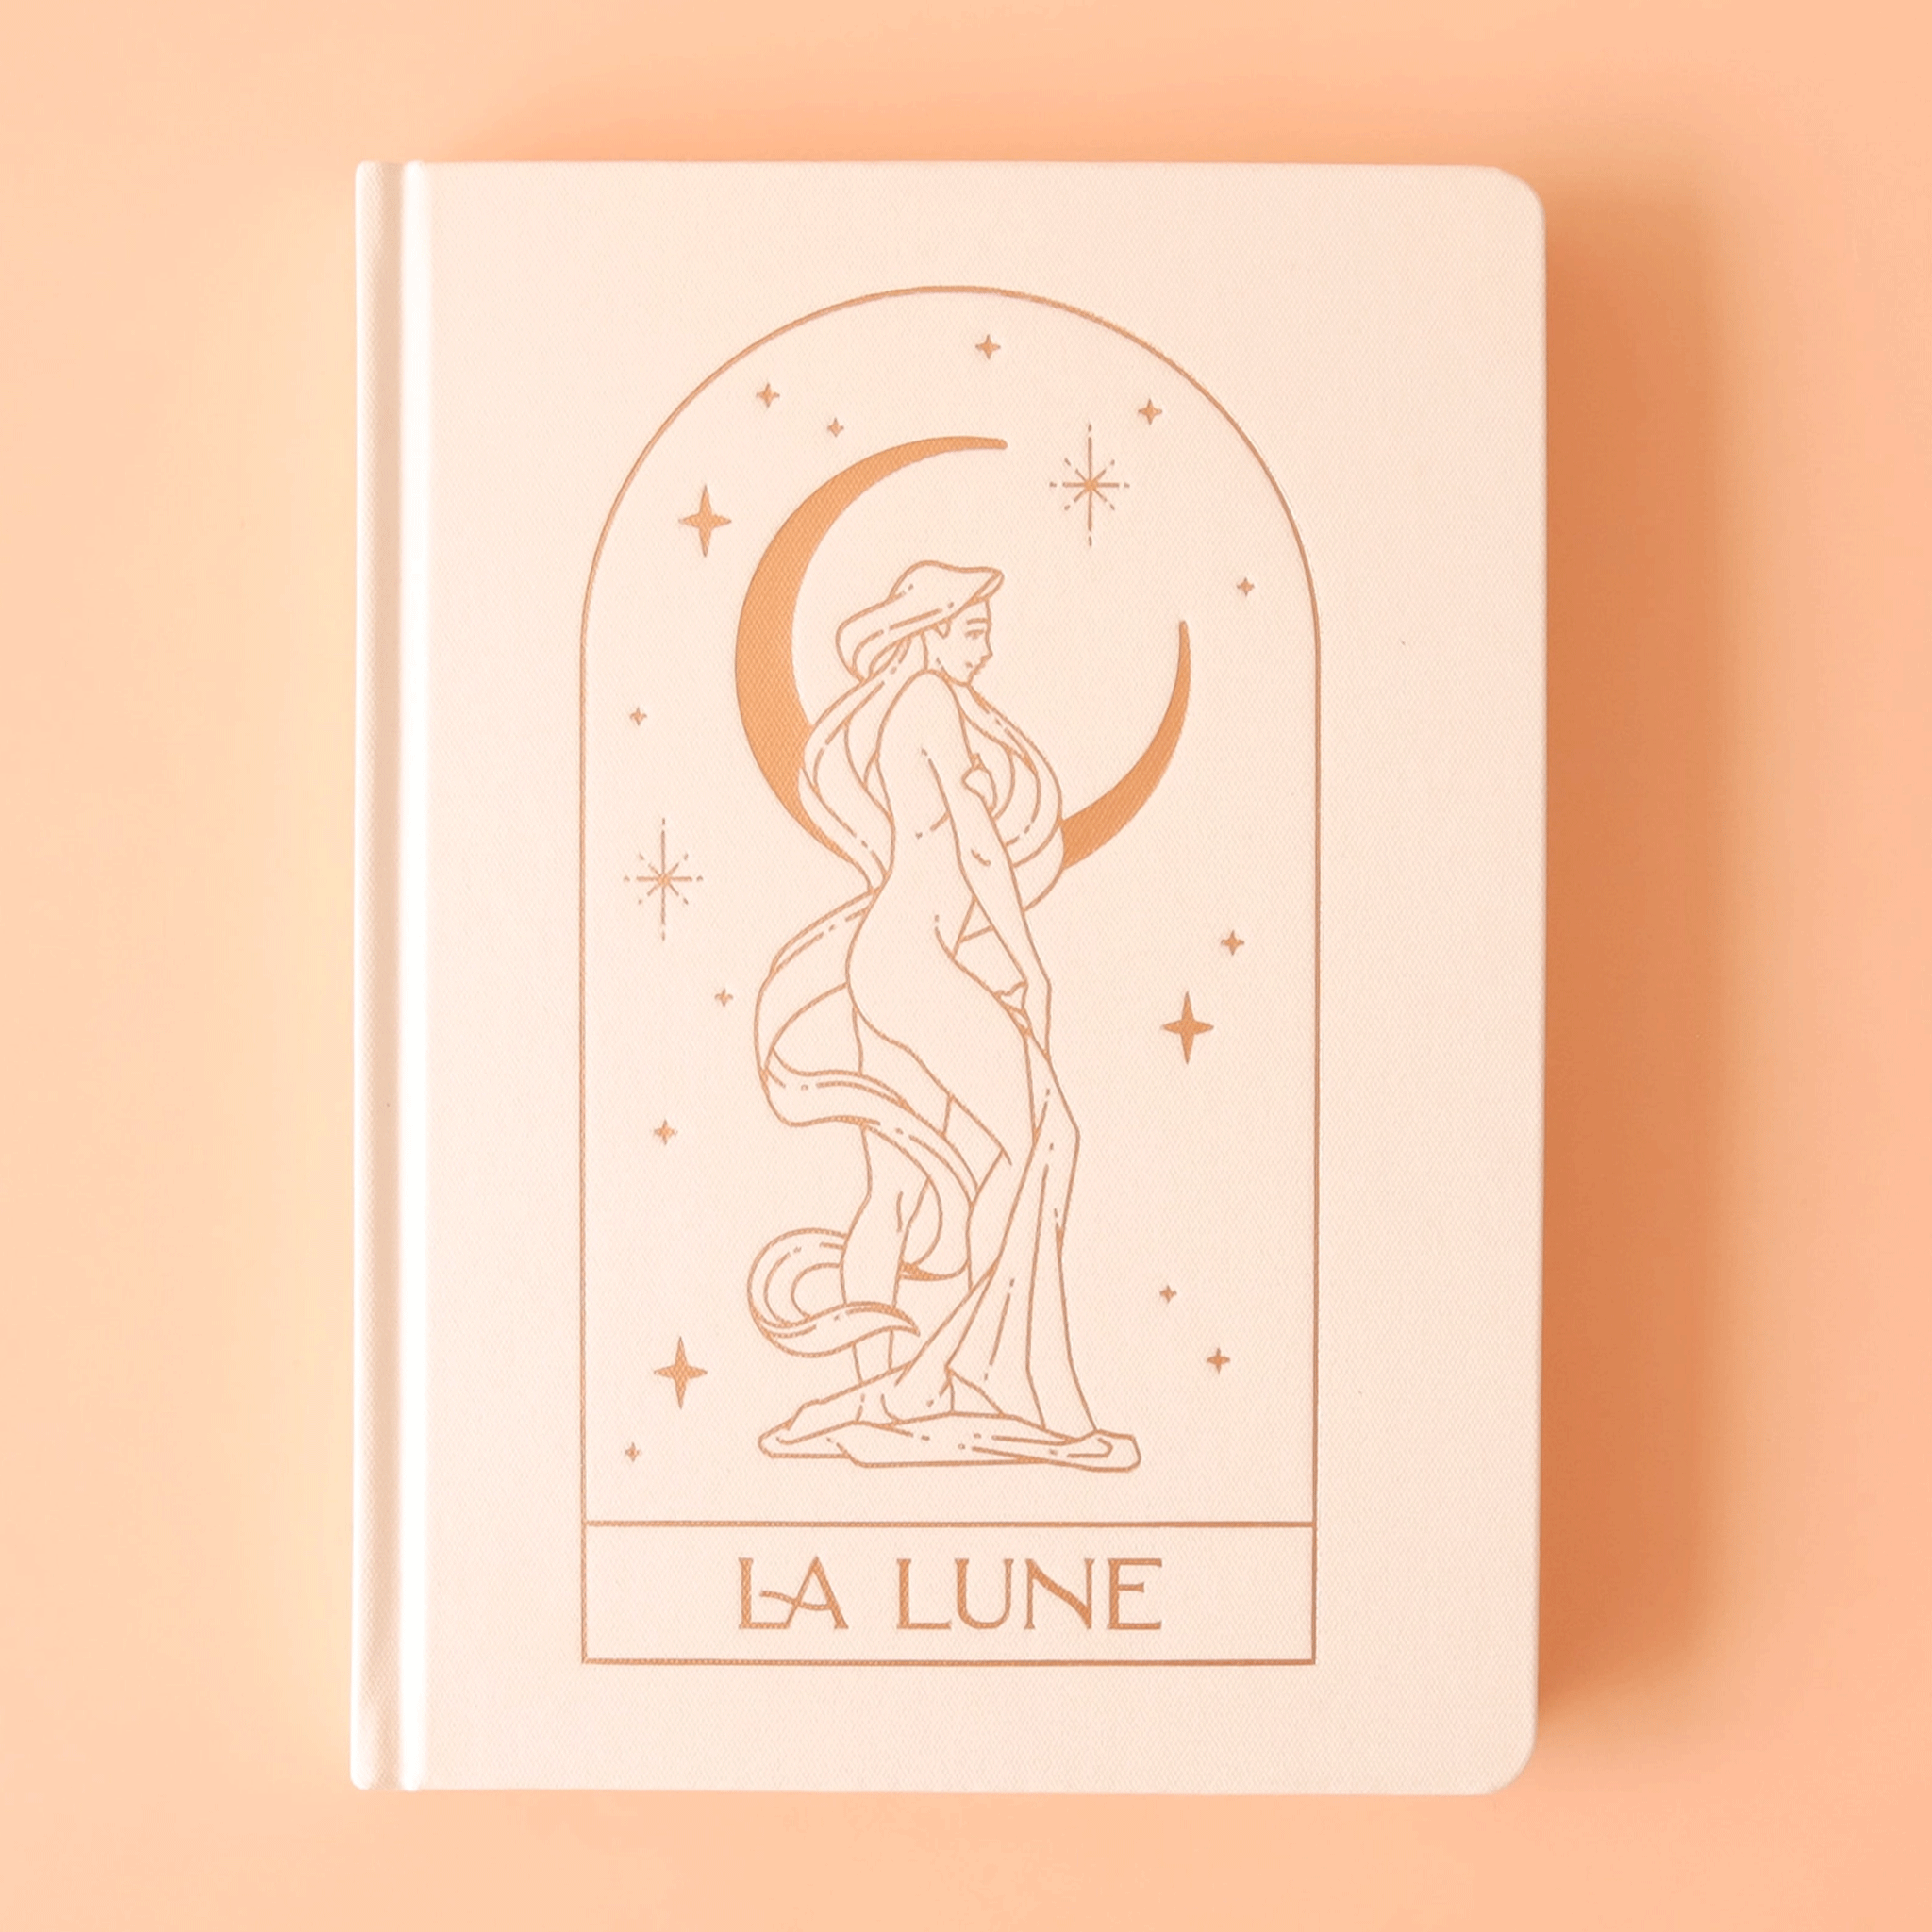 On a light yellow background is a cream hard cover journal with a gold illustration of a person wrapped in cloth in front of a crescent moon and text at the bottom of the arch that reads, "La Lune".